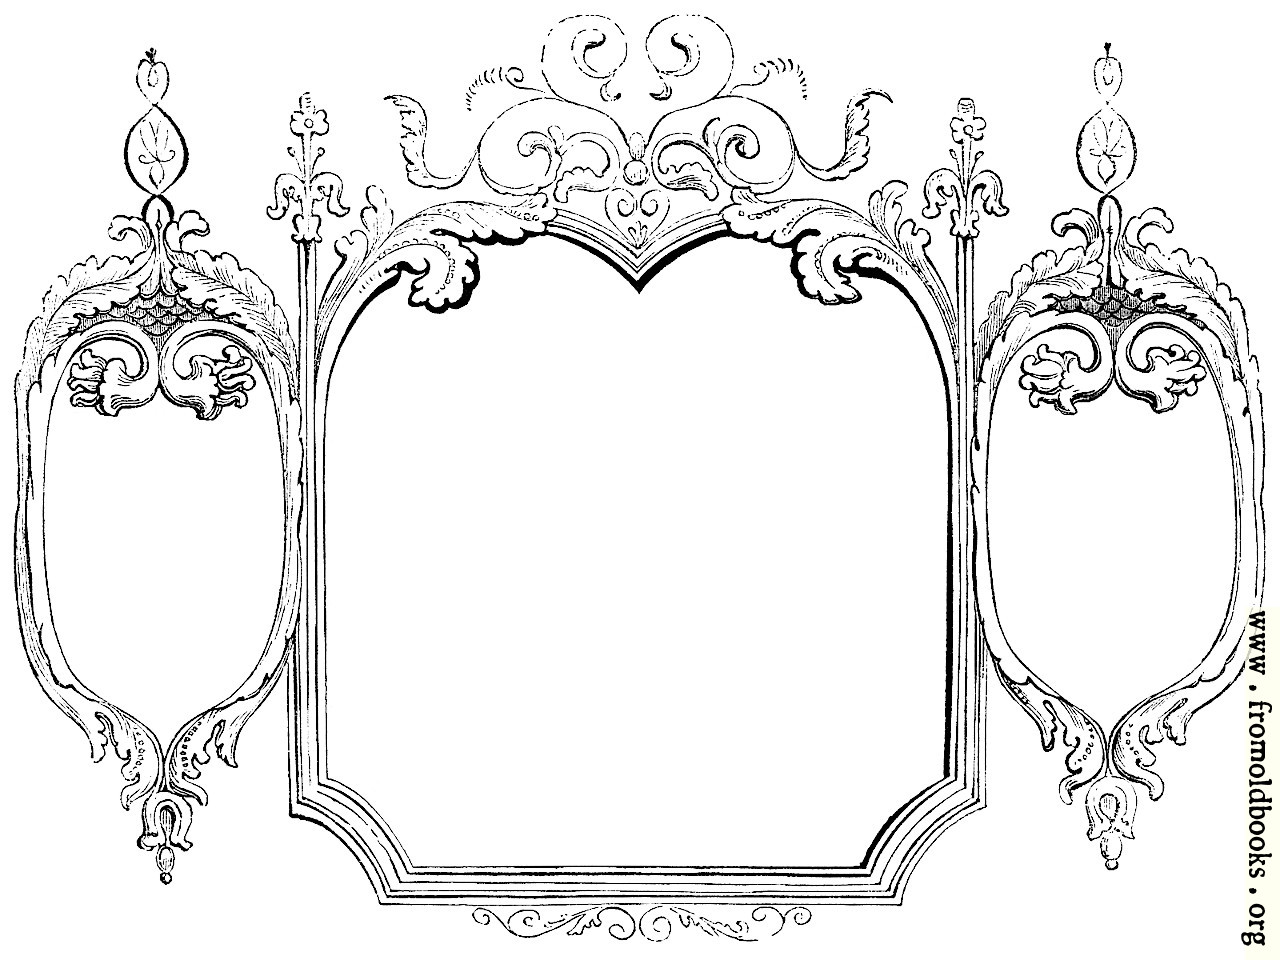 [Picture: 245 [detail].—Hand-drawn Victorian/rococo frame]